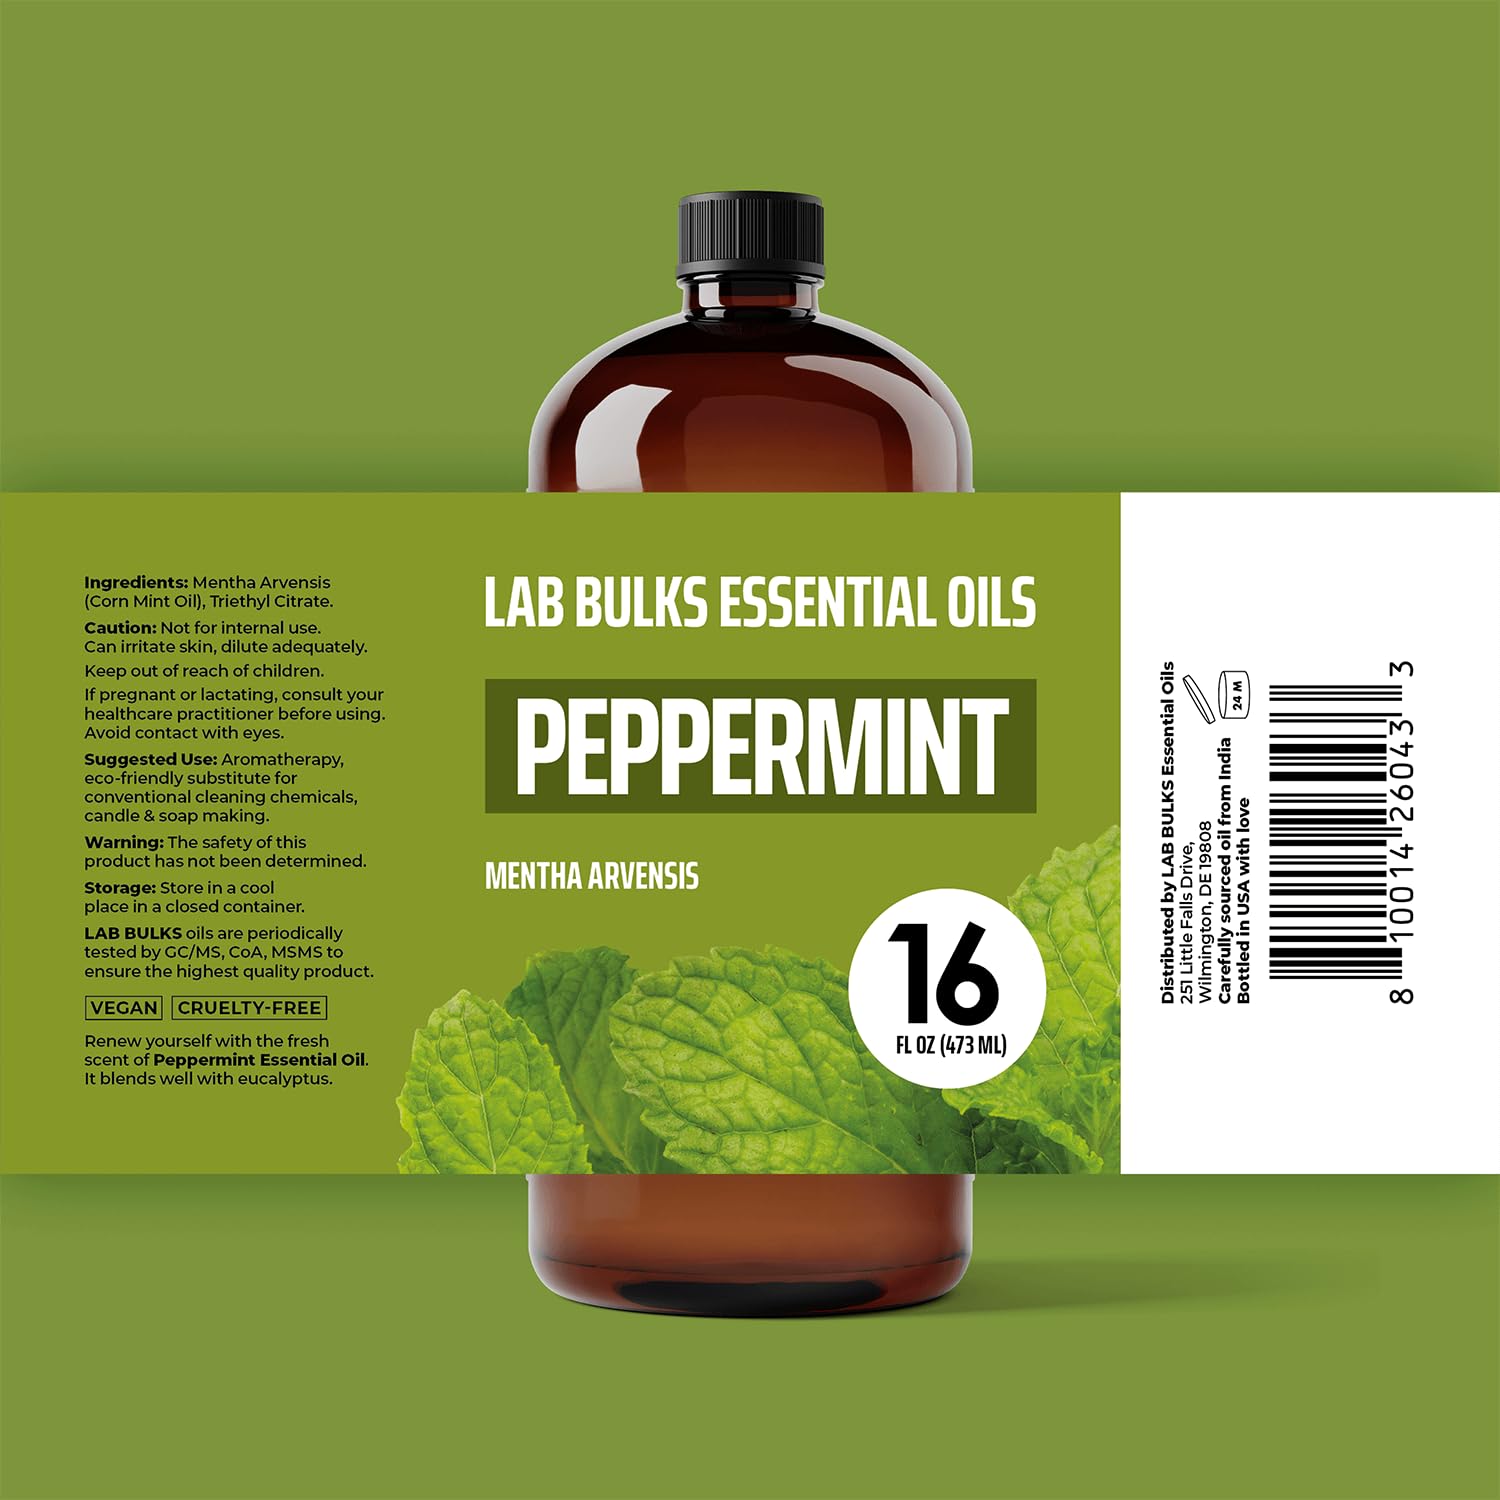 Bundle of Lab Bulks Peppermint and Eucalyptus Essential Oils, 16 oz Bottles, for Diffusers, Home Care, Candles, Aromatherapy.